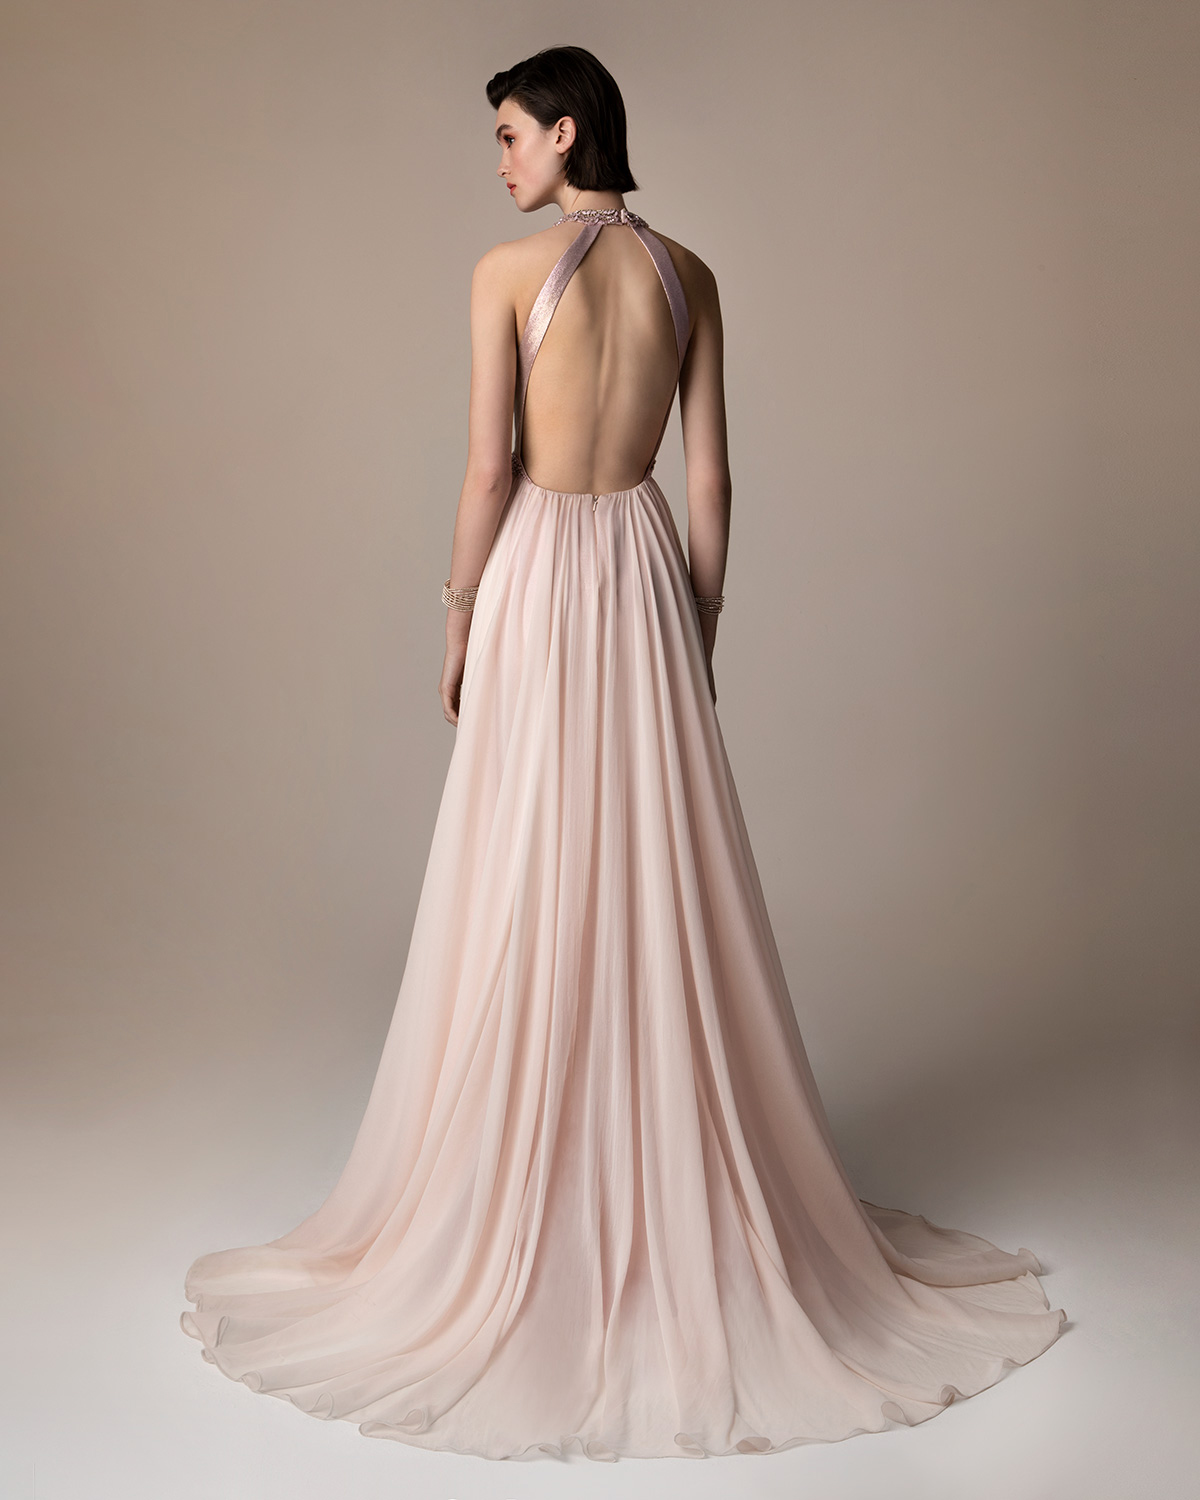 Вечерние платья / Long evening dress with shining fabric and beading on the neck and the waist